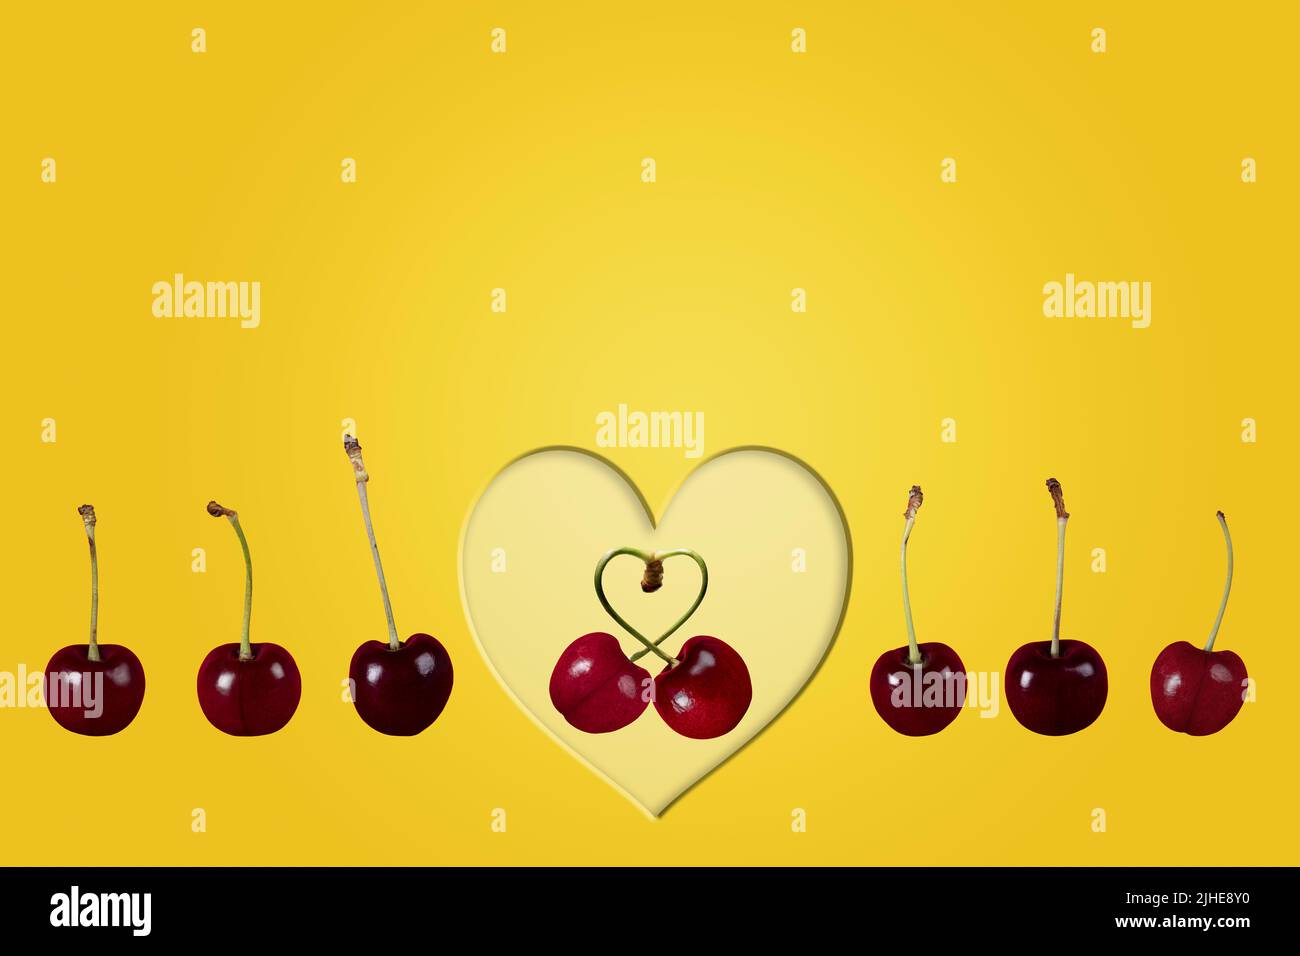 single couple love cherries cherry fruit concept image with row line of cherries & heart on a colorful colourful yellow background Stock Photo